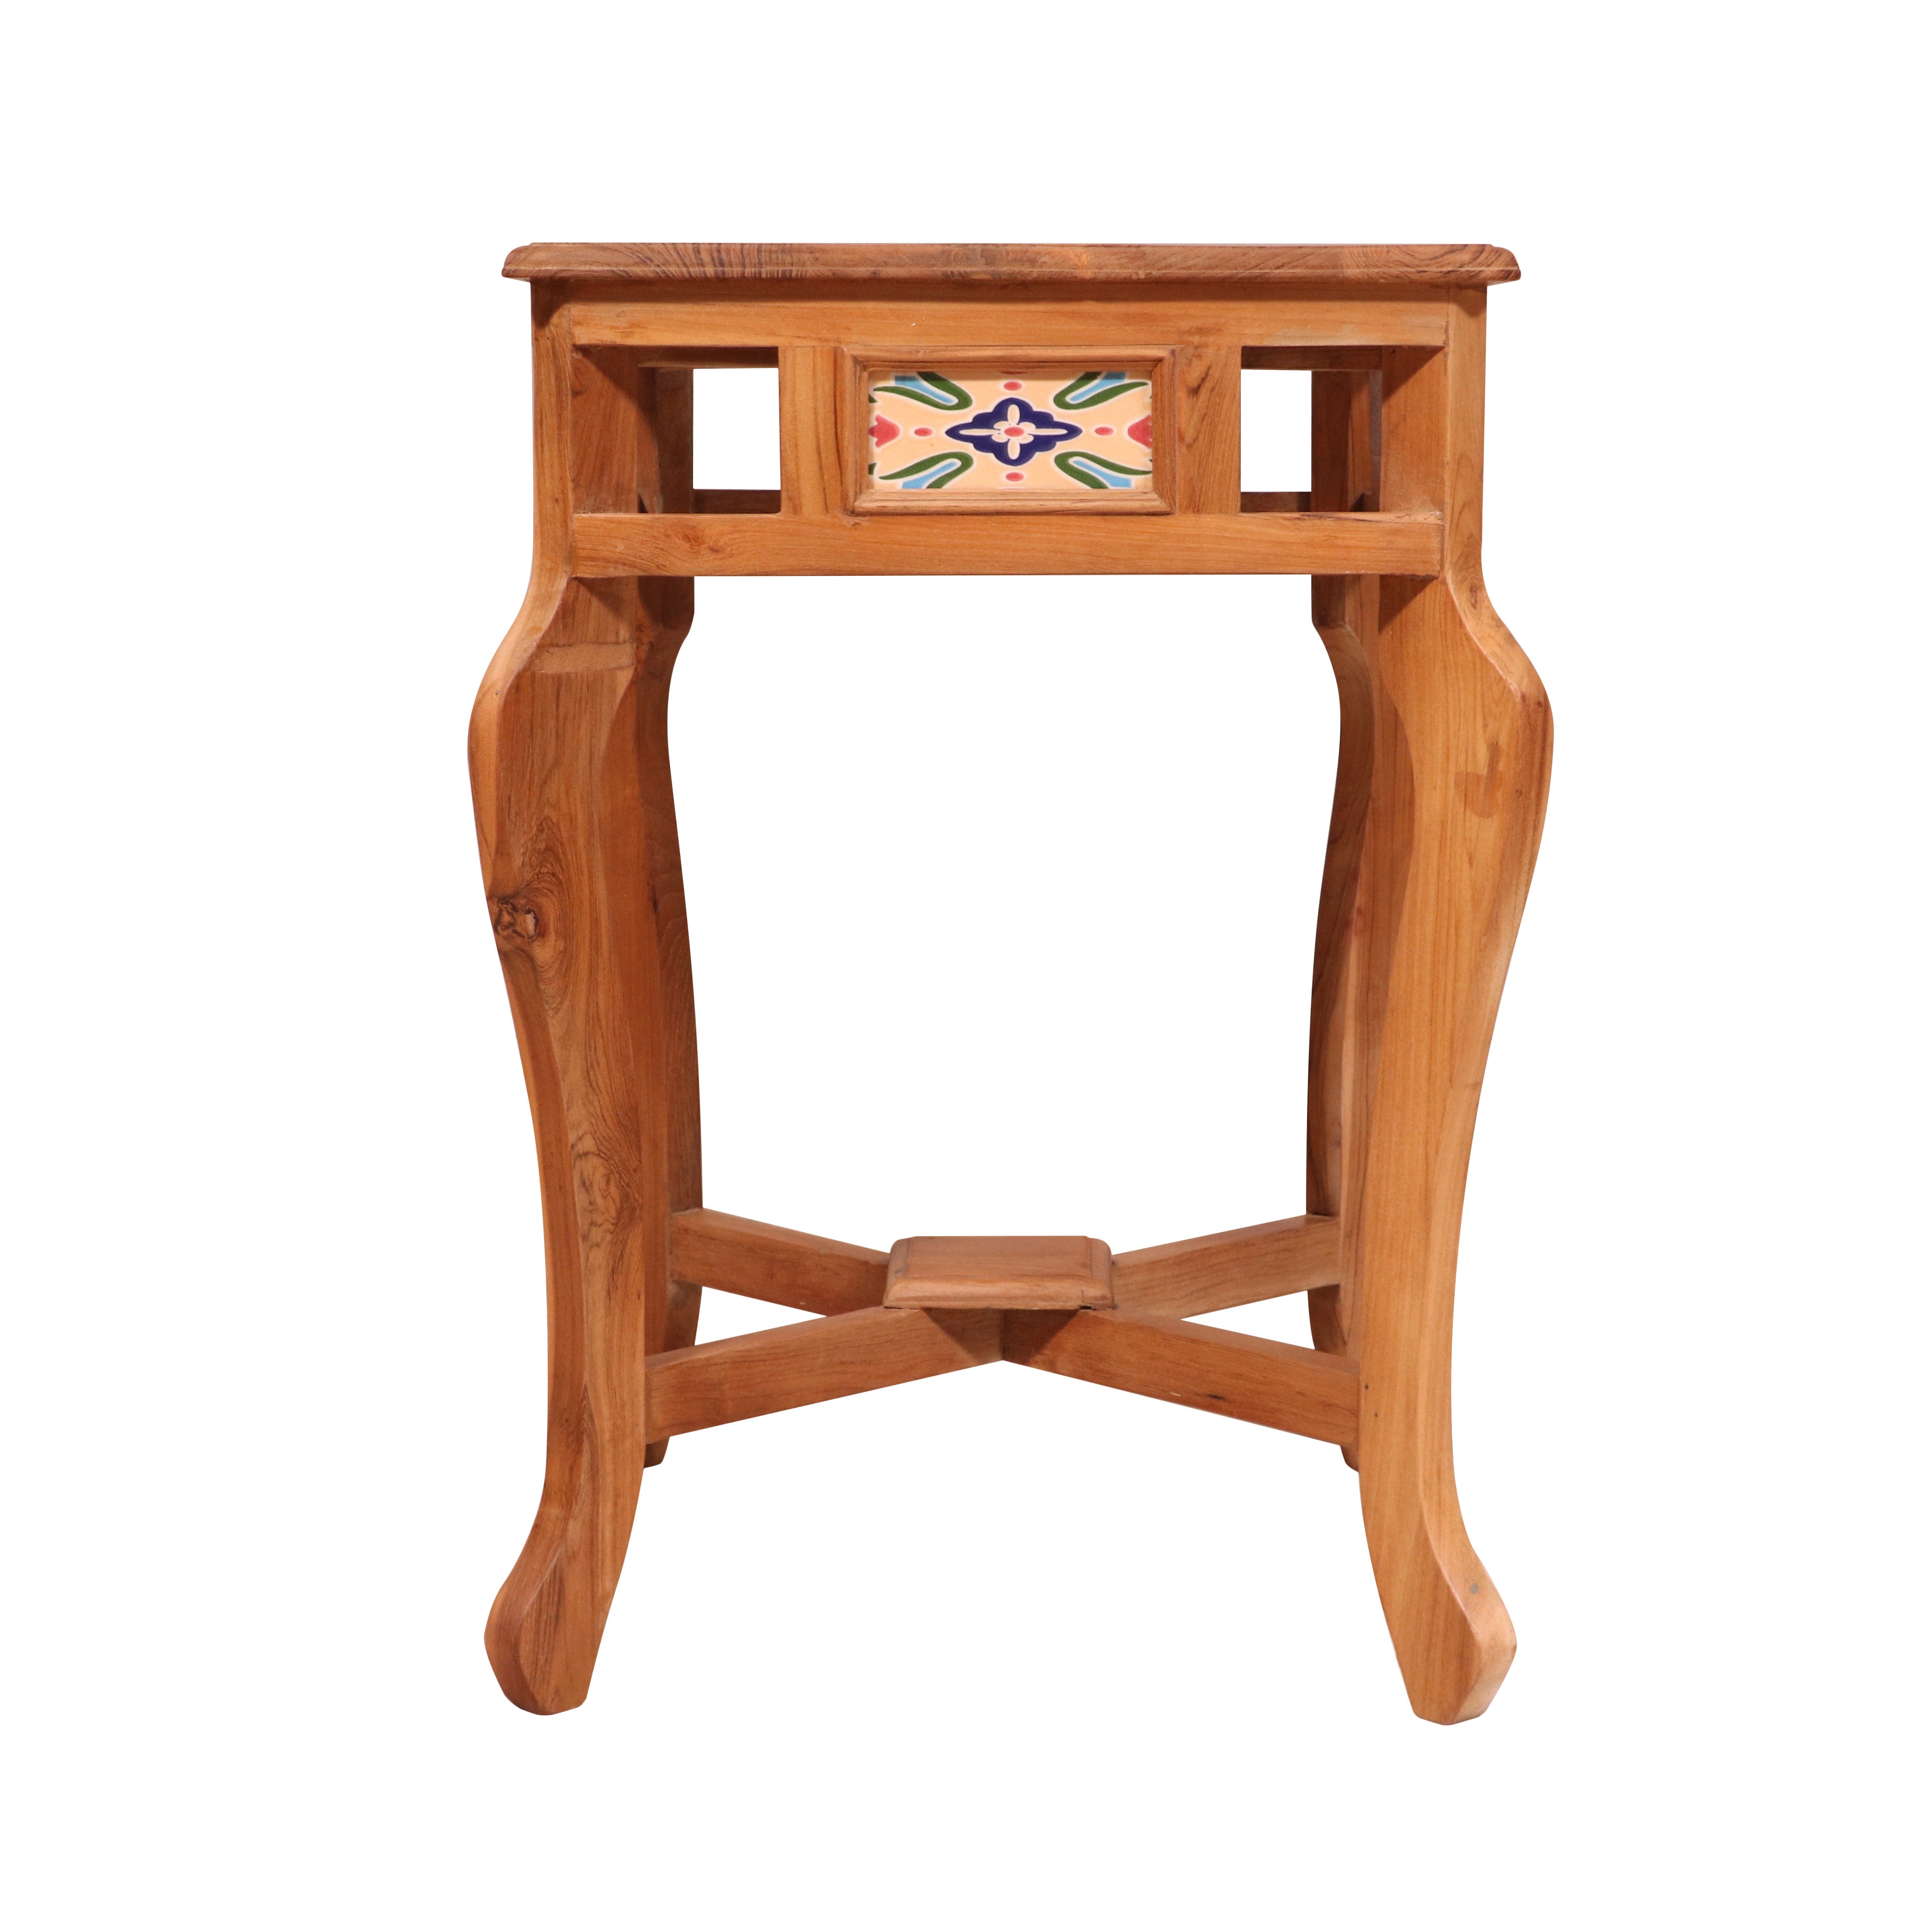 Traditional teak natural tone Table End Table